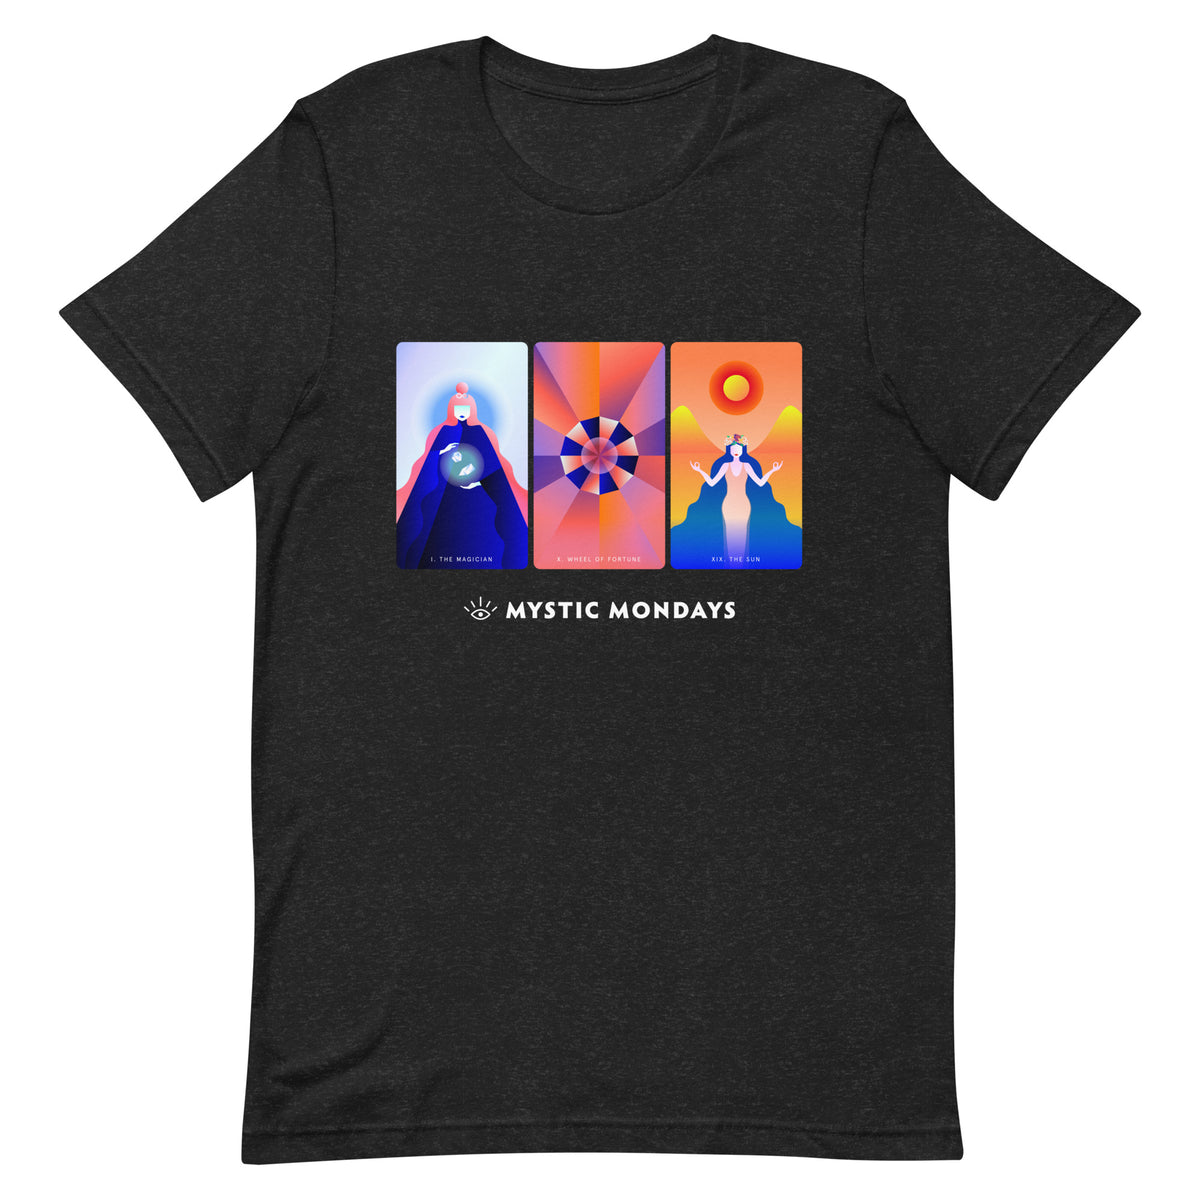 The Magician, Wheel of Fortune, and The Sun T-shirt